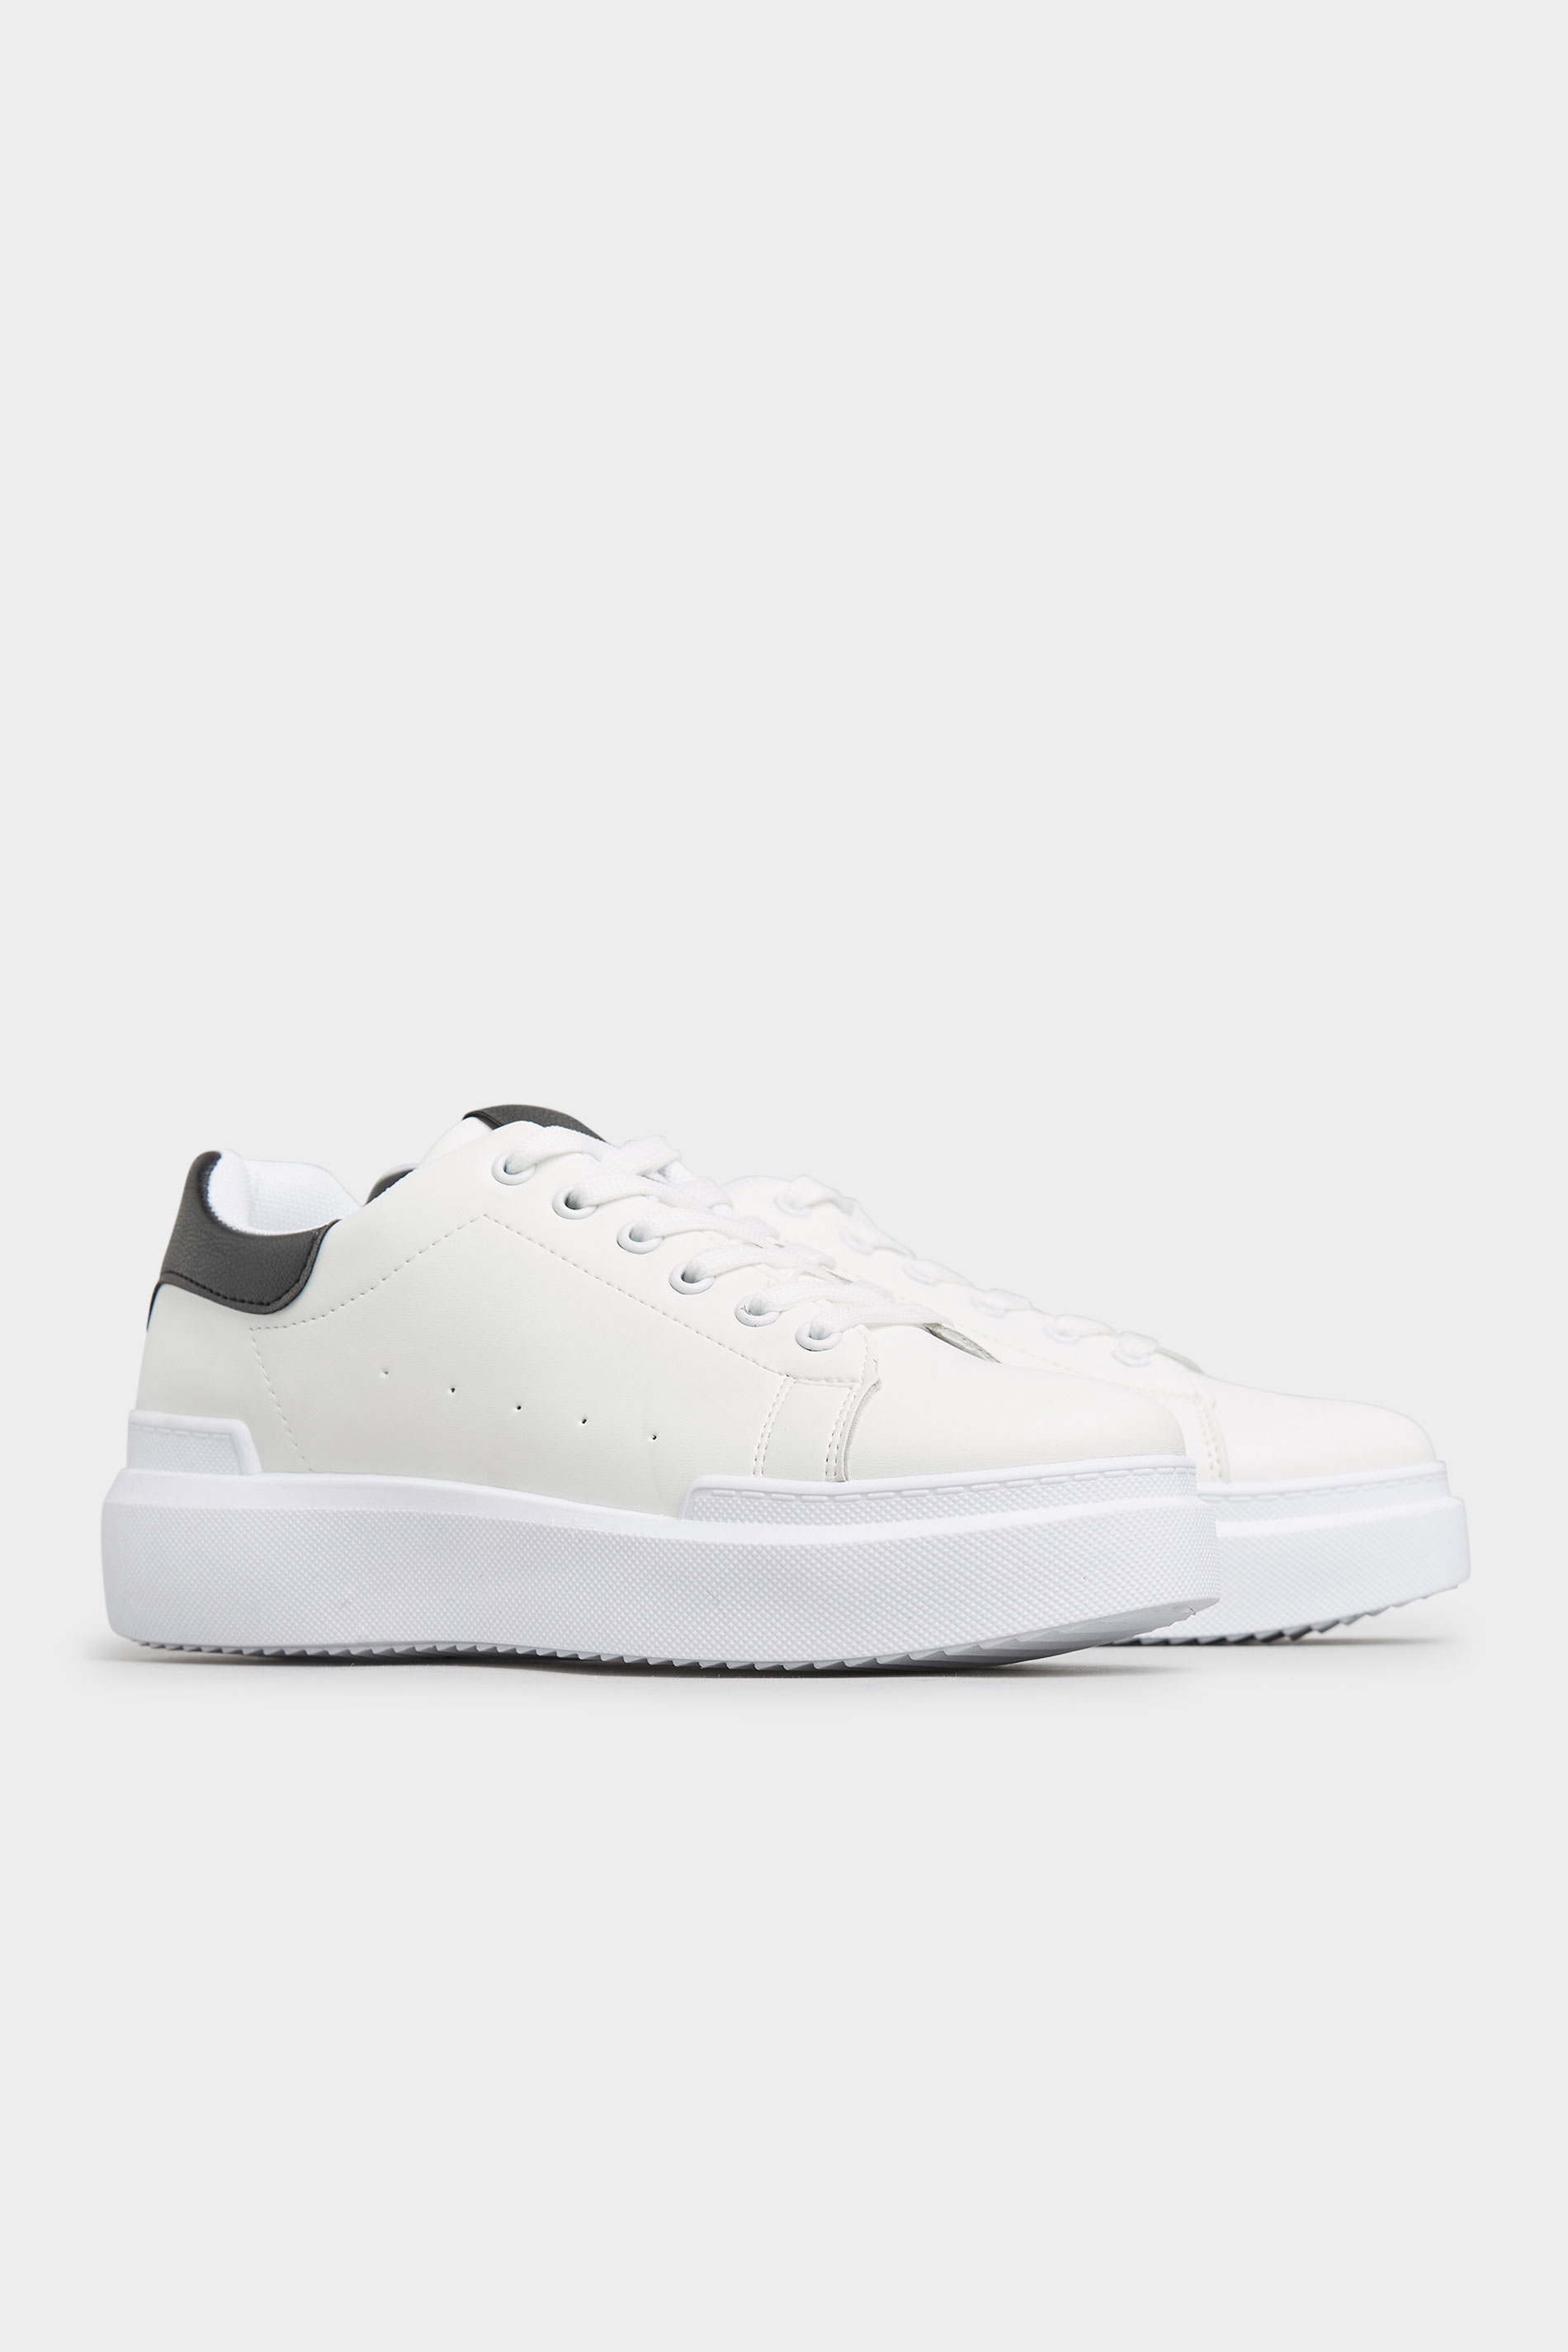 LIMITED COLLECTION White and Black Flatform Trainer In Wide E Fit_B.jpg